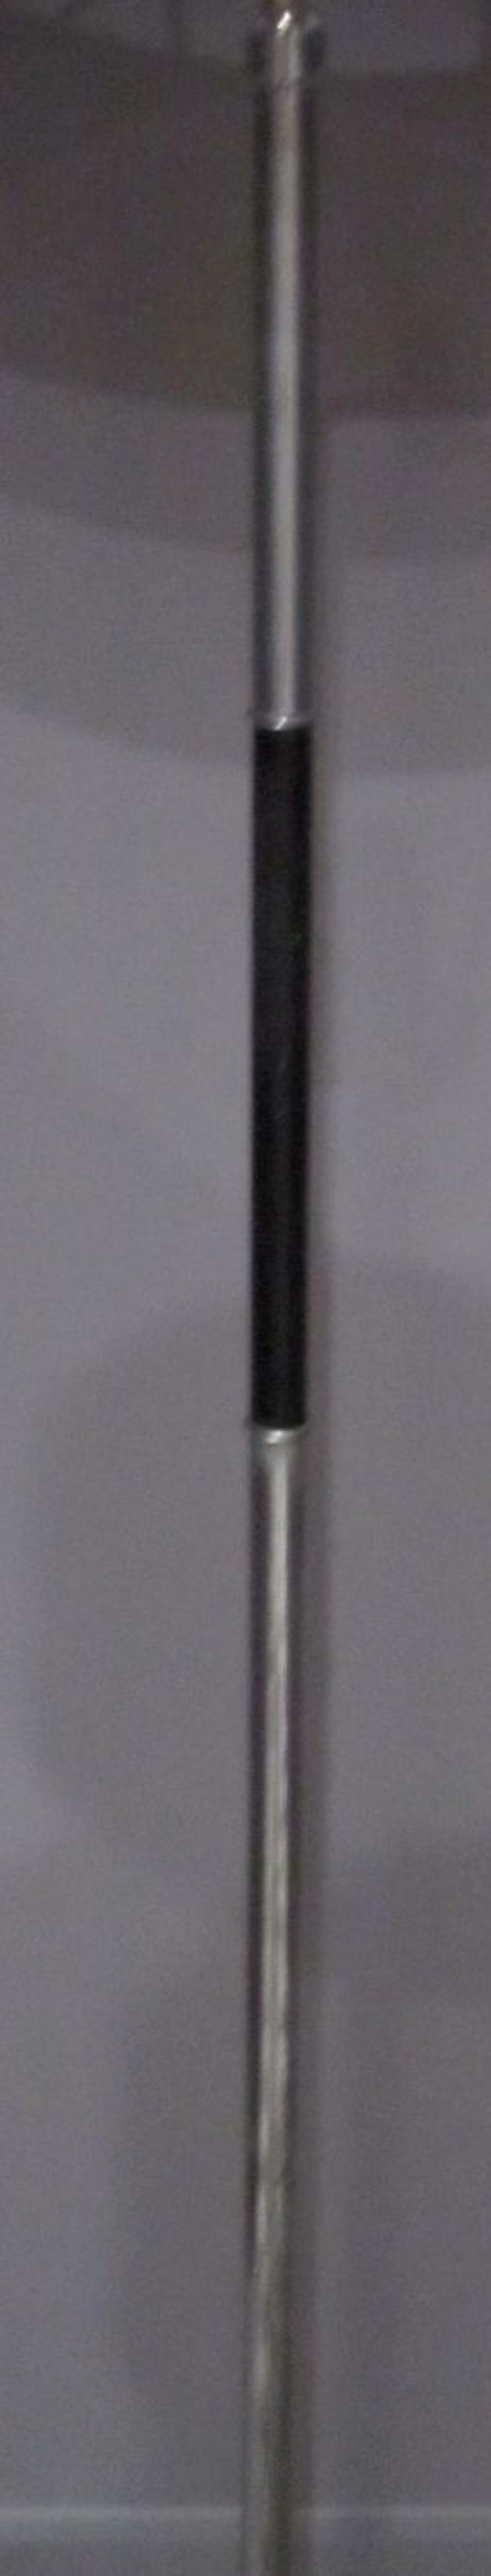 Mid-Century French pole lamp with tripod legs. The pole is chrome with a band of black metal towards the top of the pole. The legs are black metal with small chrome cylinders at the end of each leg.
The shade is natural linen.
61